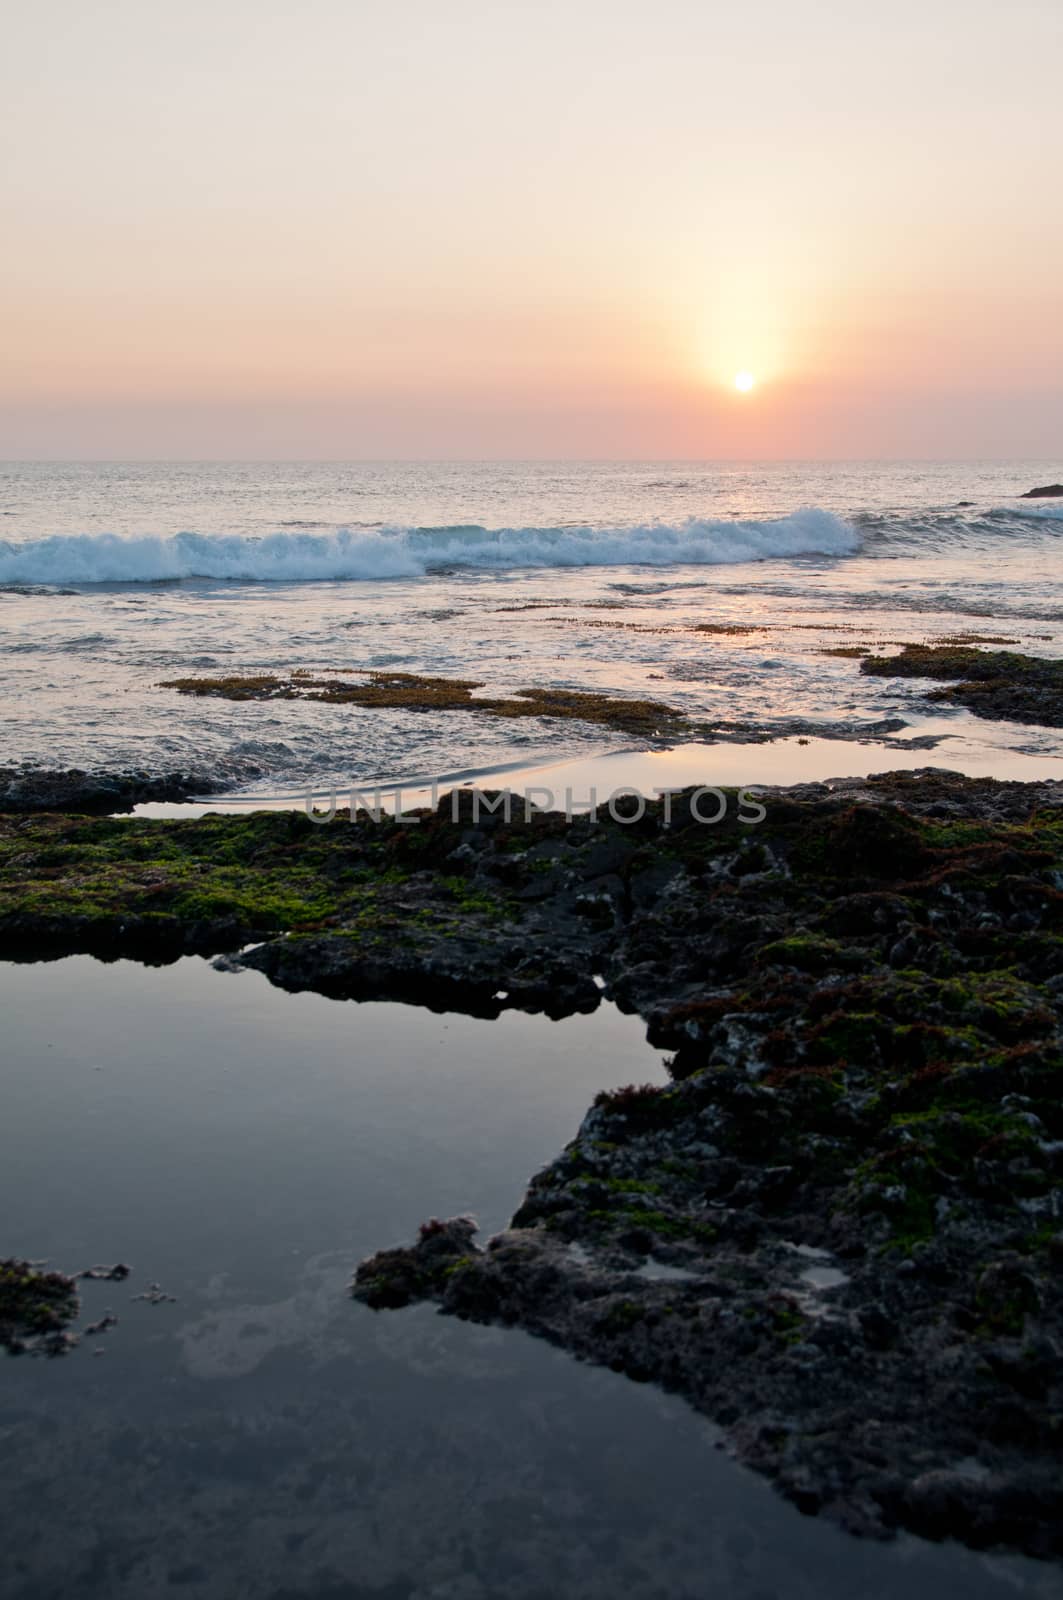 Sunset scene at Tanah Lot beach in Bali Indonesia sea in the eve by eyeofpaul